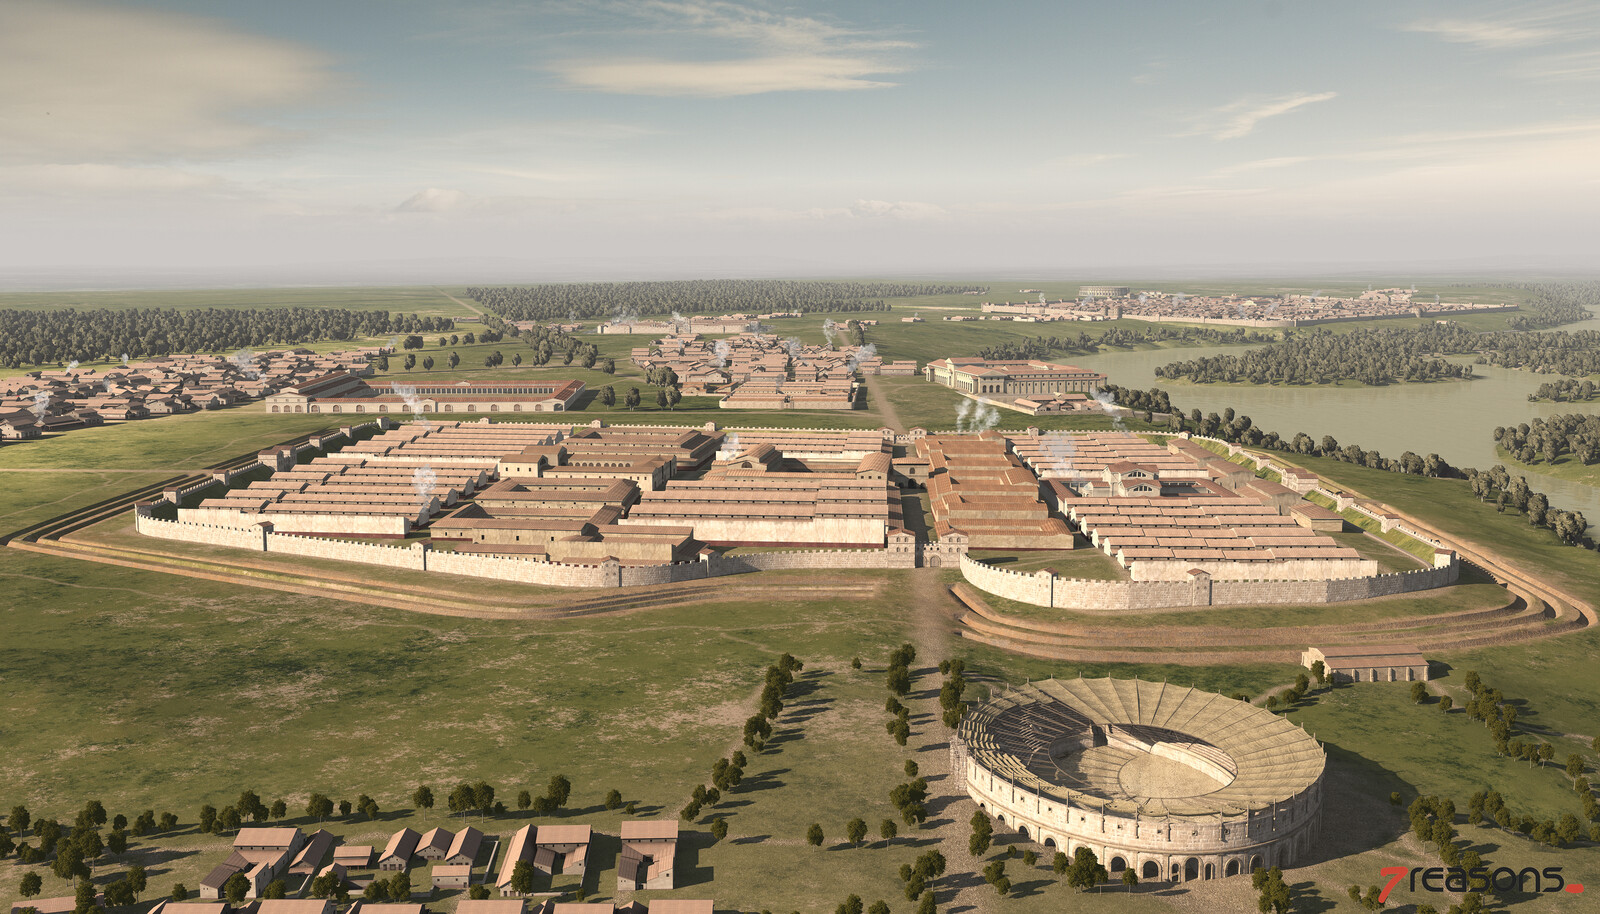 Overview of the Legionary Fortress of Carnuntum and its amphitheatre.